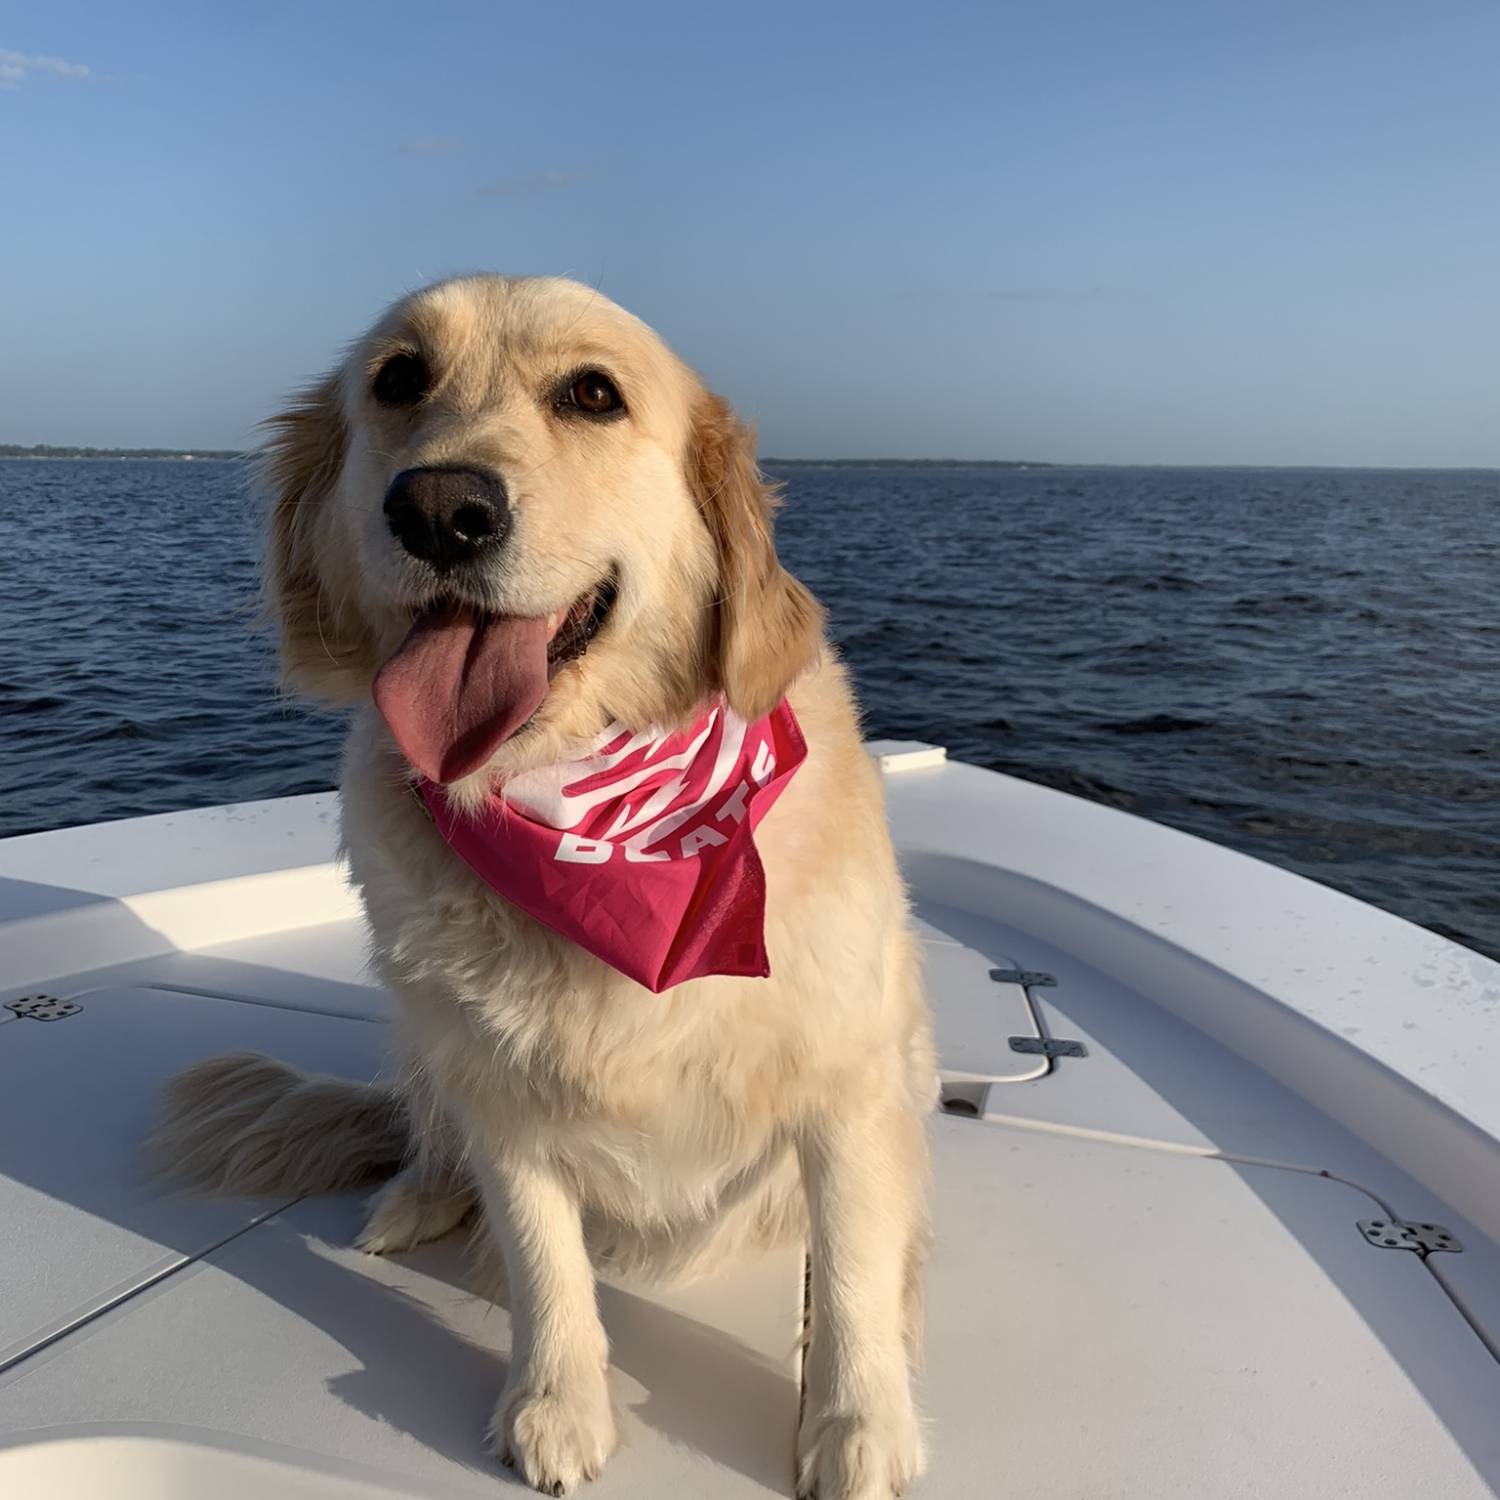 Annie girl loves the boat!